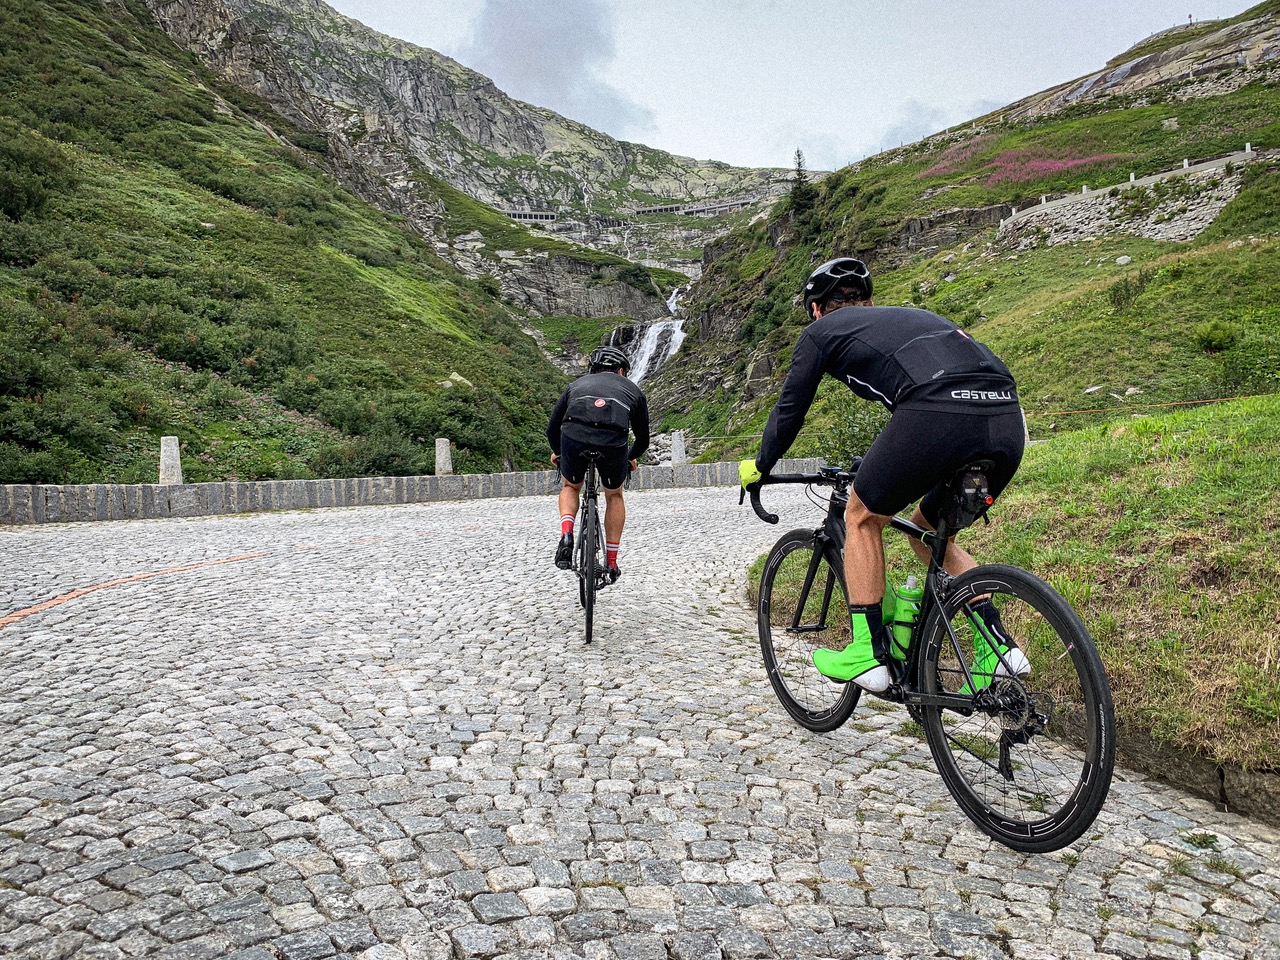 Cobbles and climbs, who could ask for more!